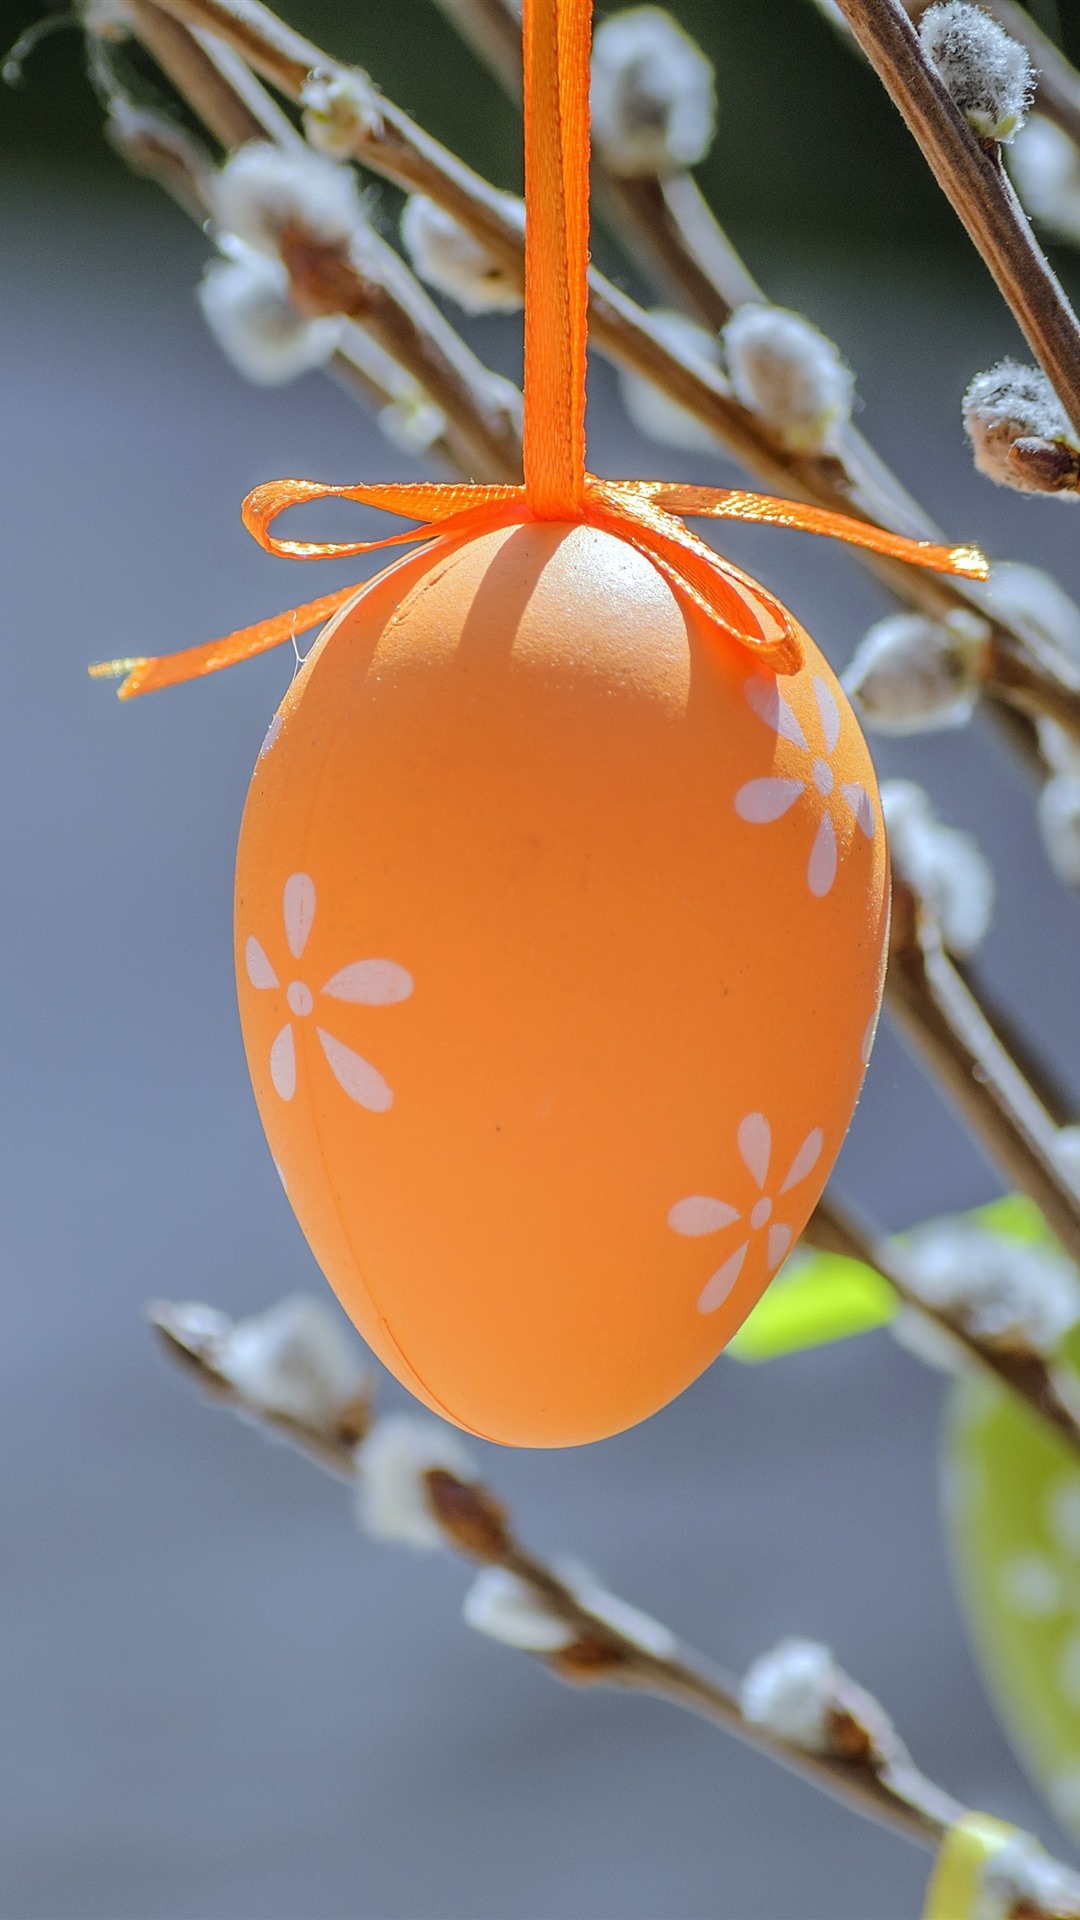 Orange Easter Egg, Twigs 1242x2688 IPhone 11 Pro XS Max Wallpaper, Background, Picture, Image